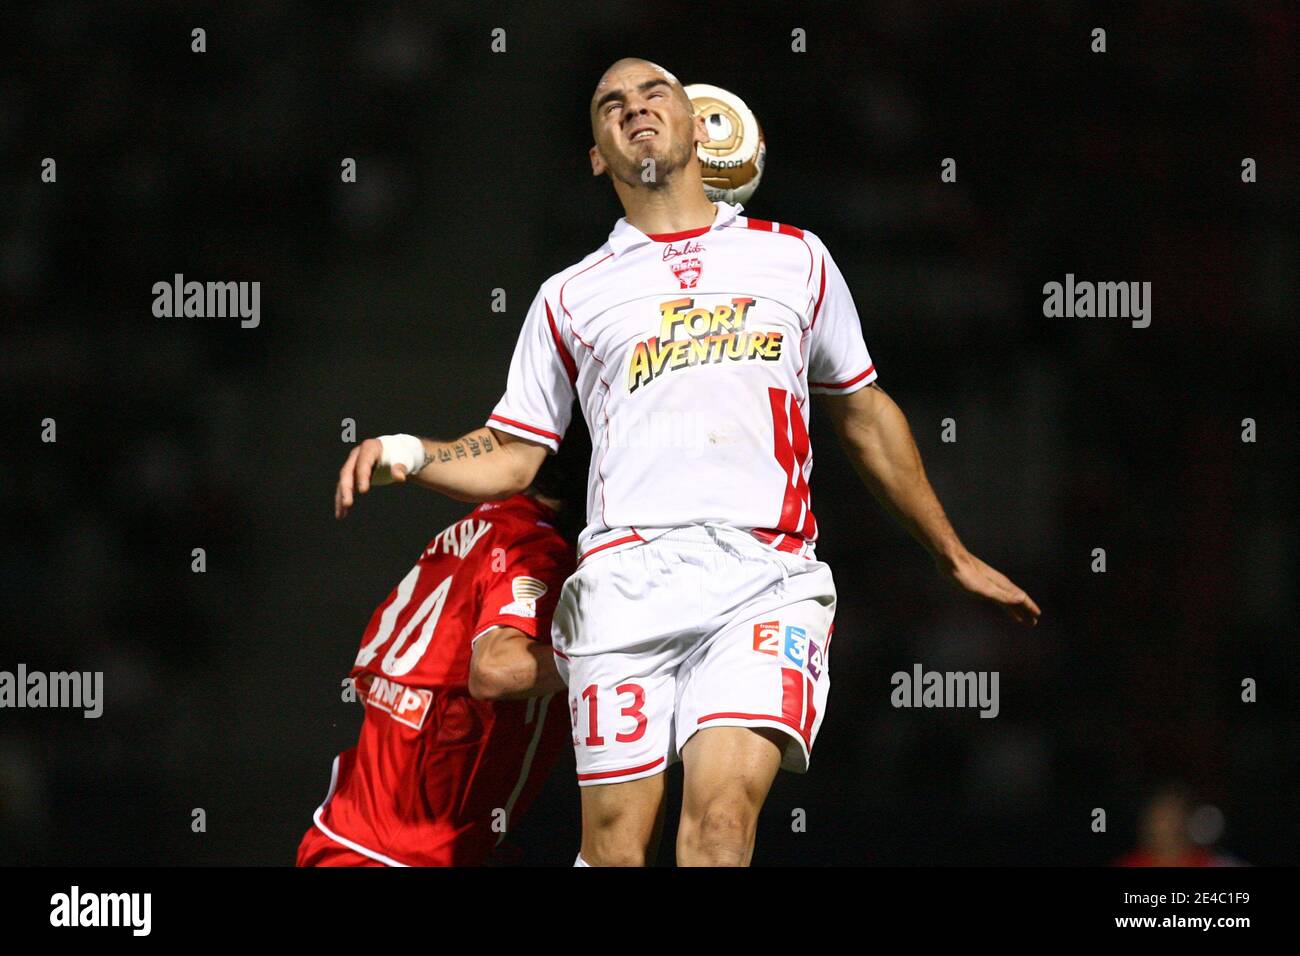 Nancy's Macaluso Damian fights for the ball with Monaco's Park Chu Young during the French League Cup Soccer Match, AS Nancy Lorraine vs AS Monaco at Marcel Picot Stadium in Nancy, east of France, on September 23, 2009. Nancy won 2-0. Photo by Mathieu Cug Stock Photo